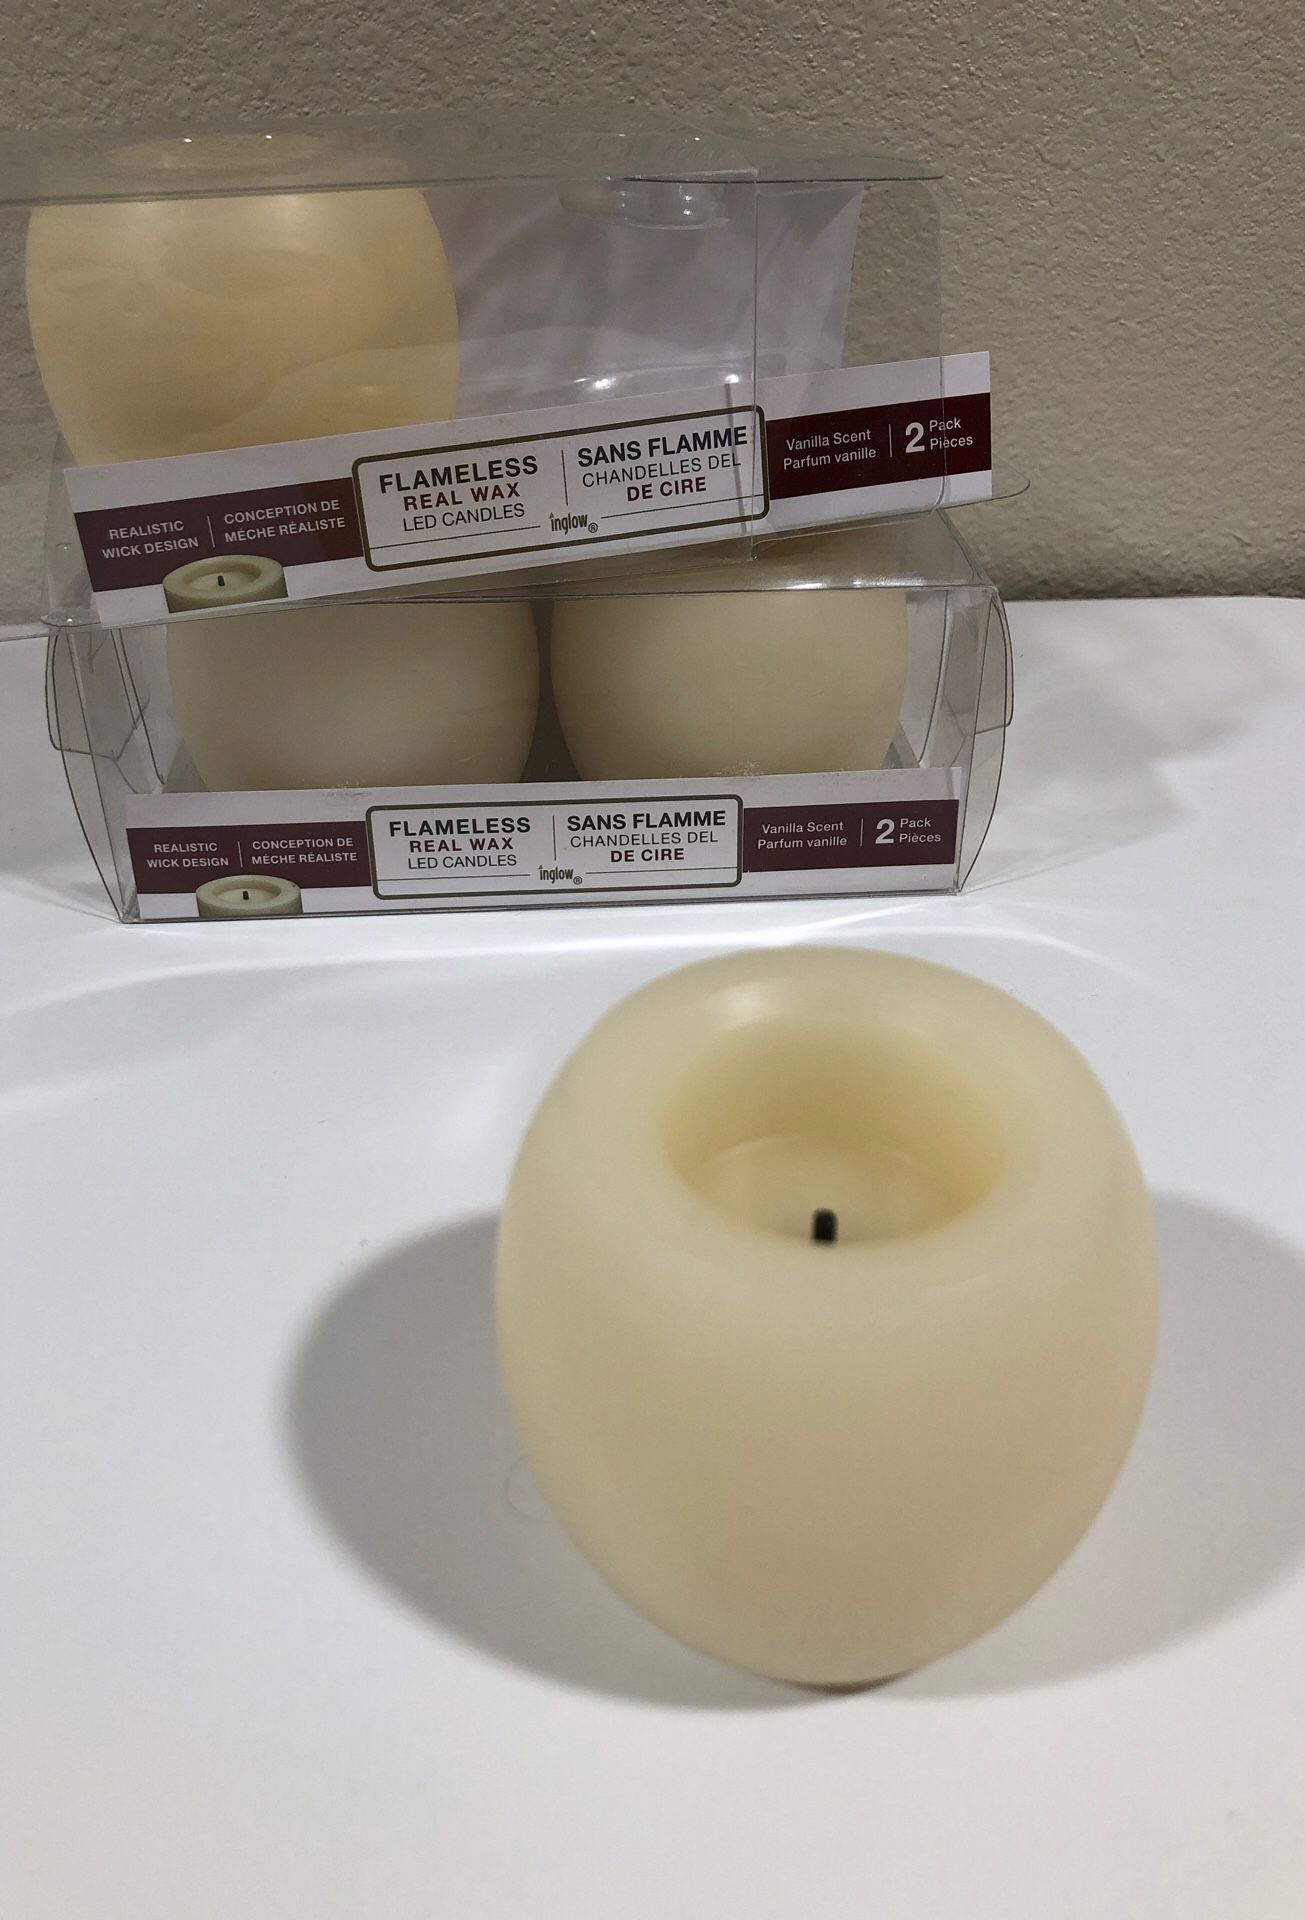 Flameless real wax LED candles *NEW